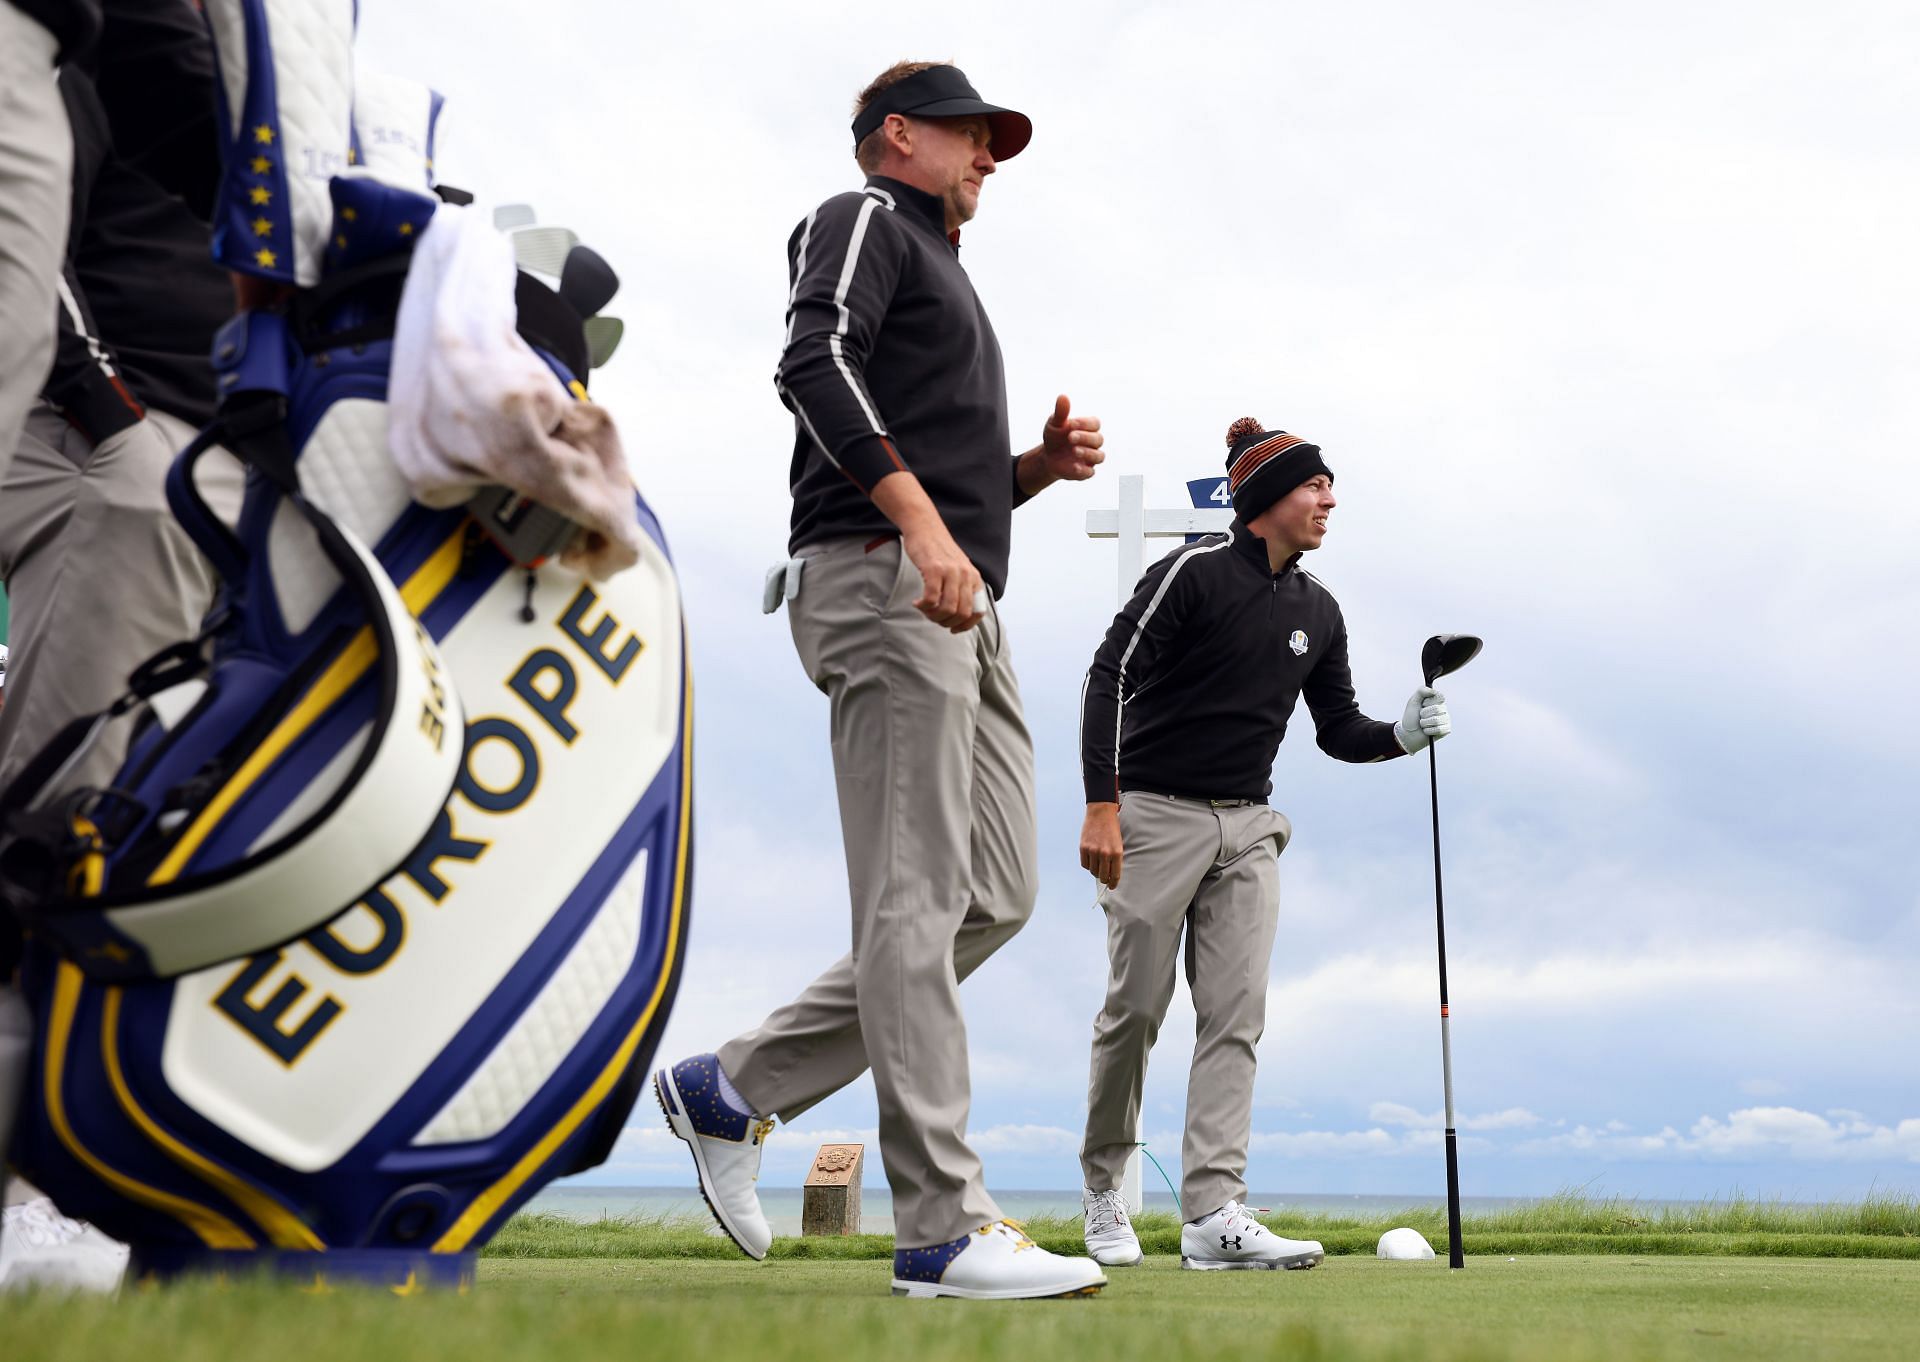 Matt Fitzpatrick and Ian Poulter at the 43rd Ryder Cup - Previews (Image via Richard Heathcote/Getty Images)